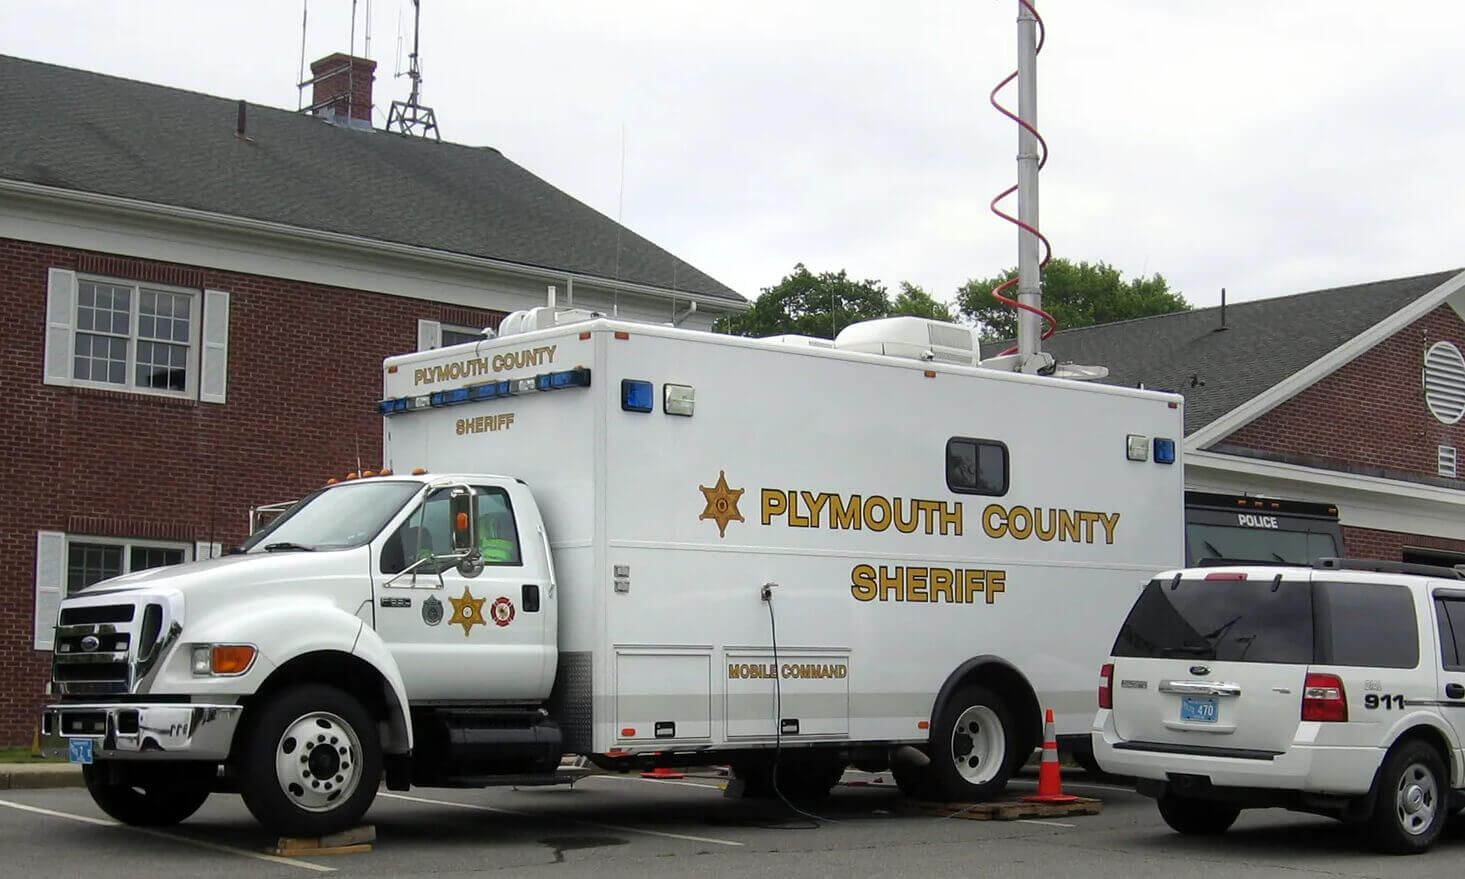 Mobile Command Center - Plymouth County Sheriff